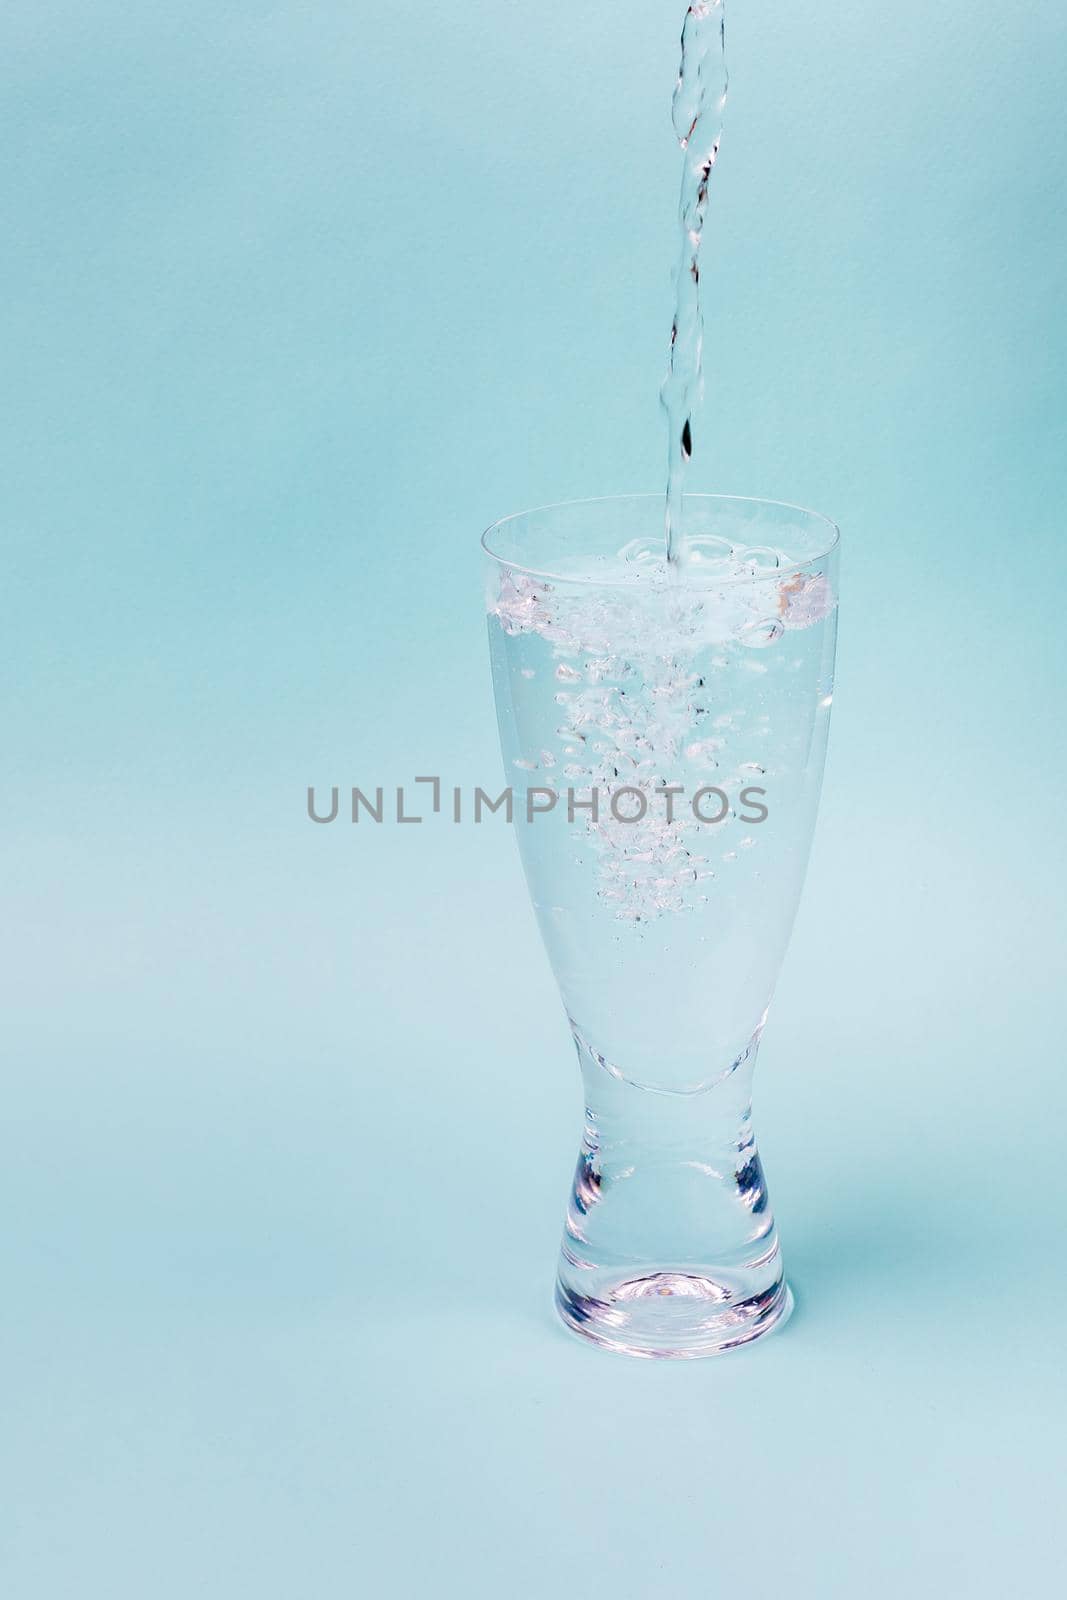 A jet of water fills transparent glass against a blue background. White bubbles rise.